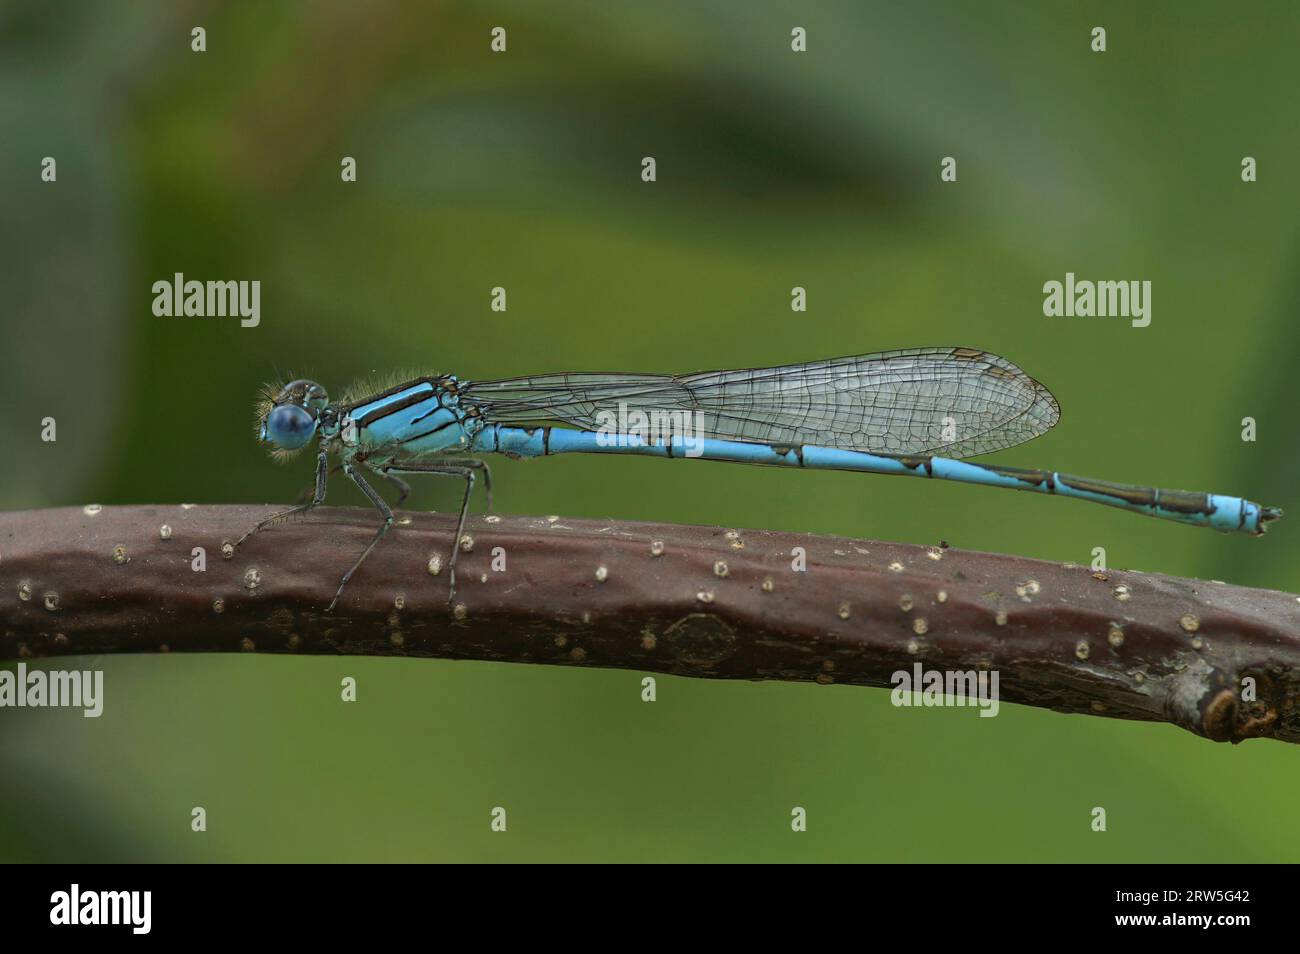 Natural closeup on a goblet-marked damselfly, Erythromma lindenii sitting on a twig Stock Photo